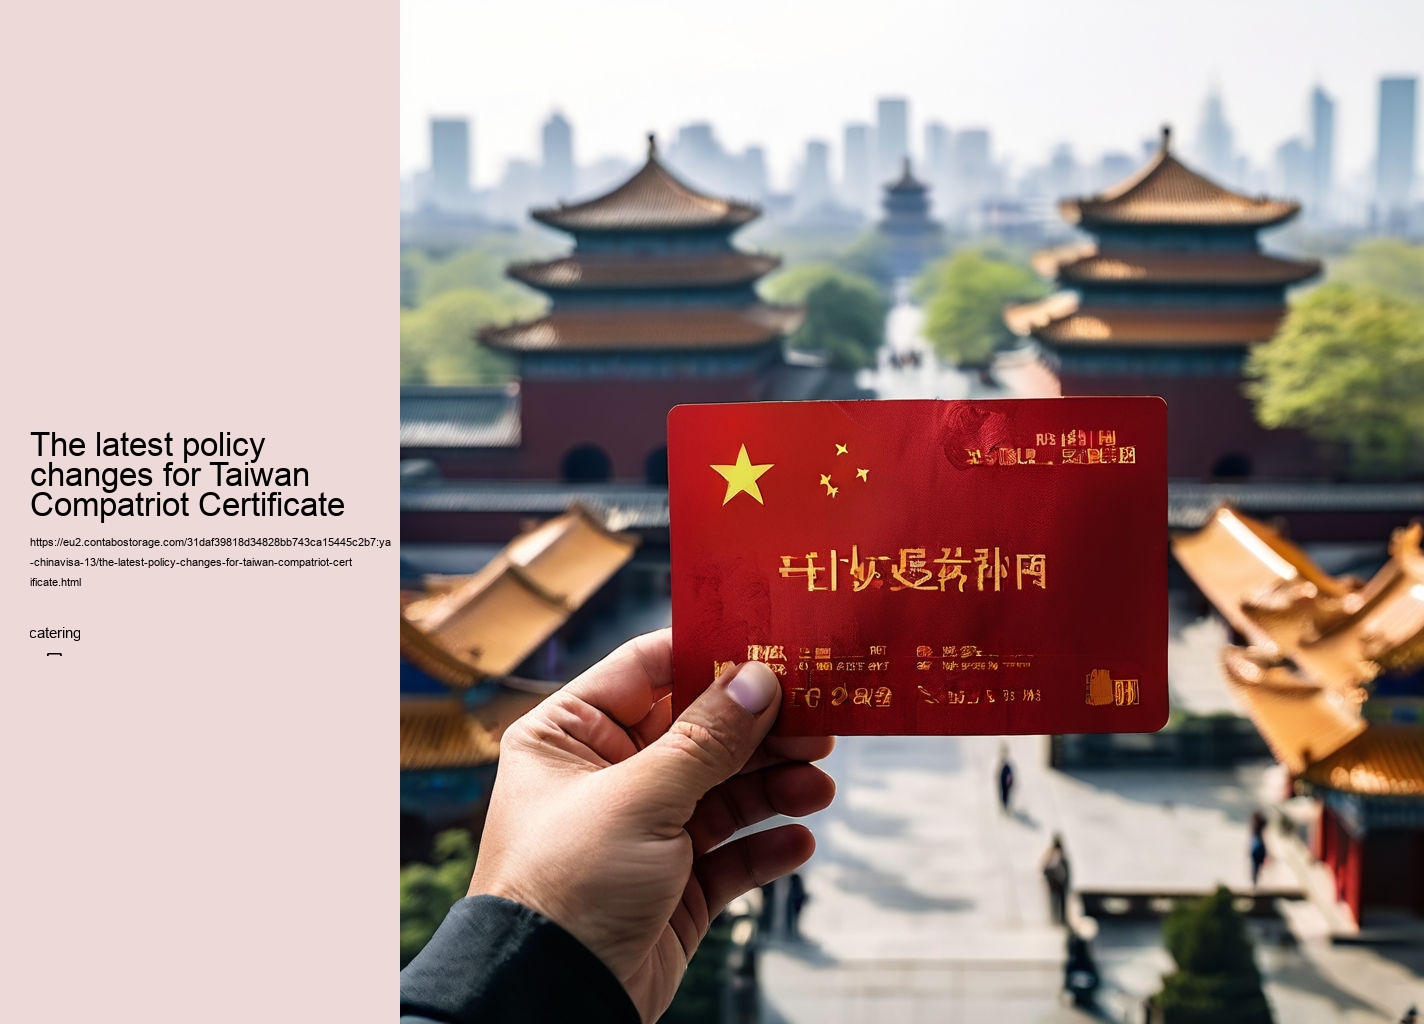 The latest policy changes for Taiwan Compatriot Certificate